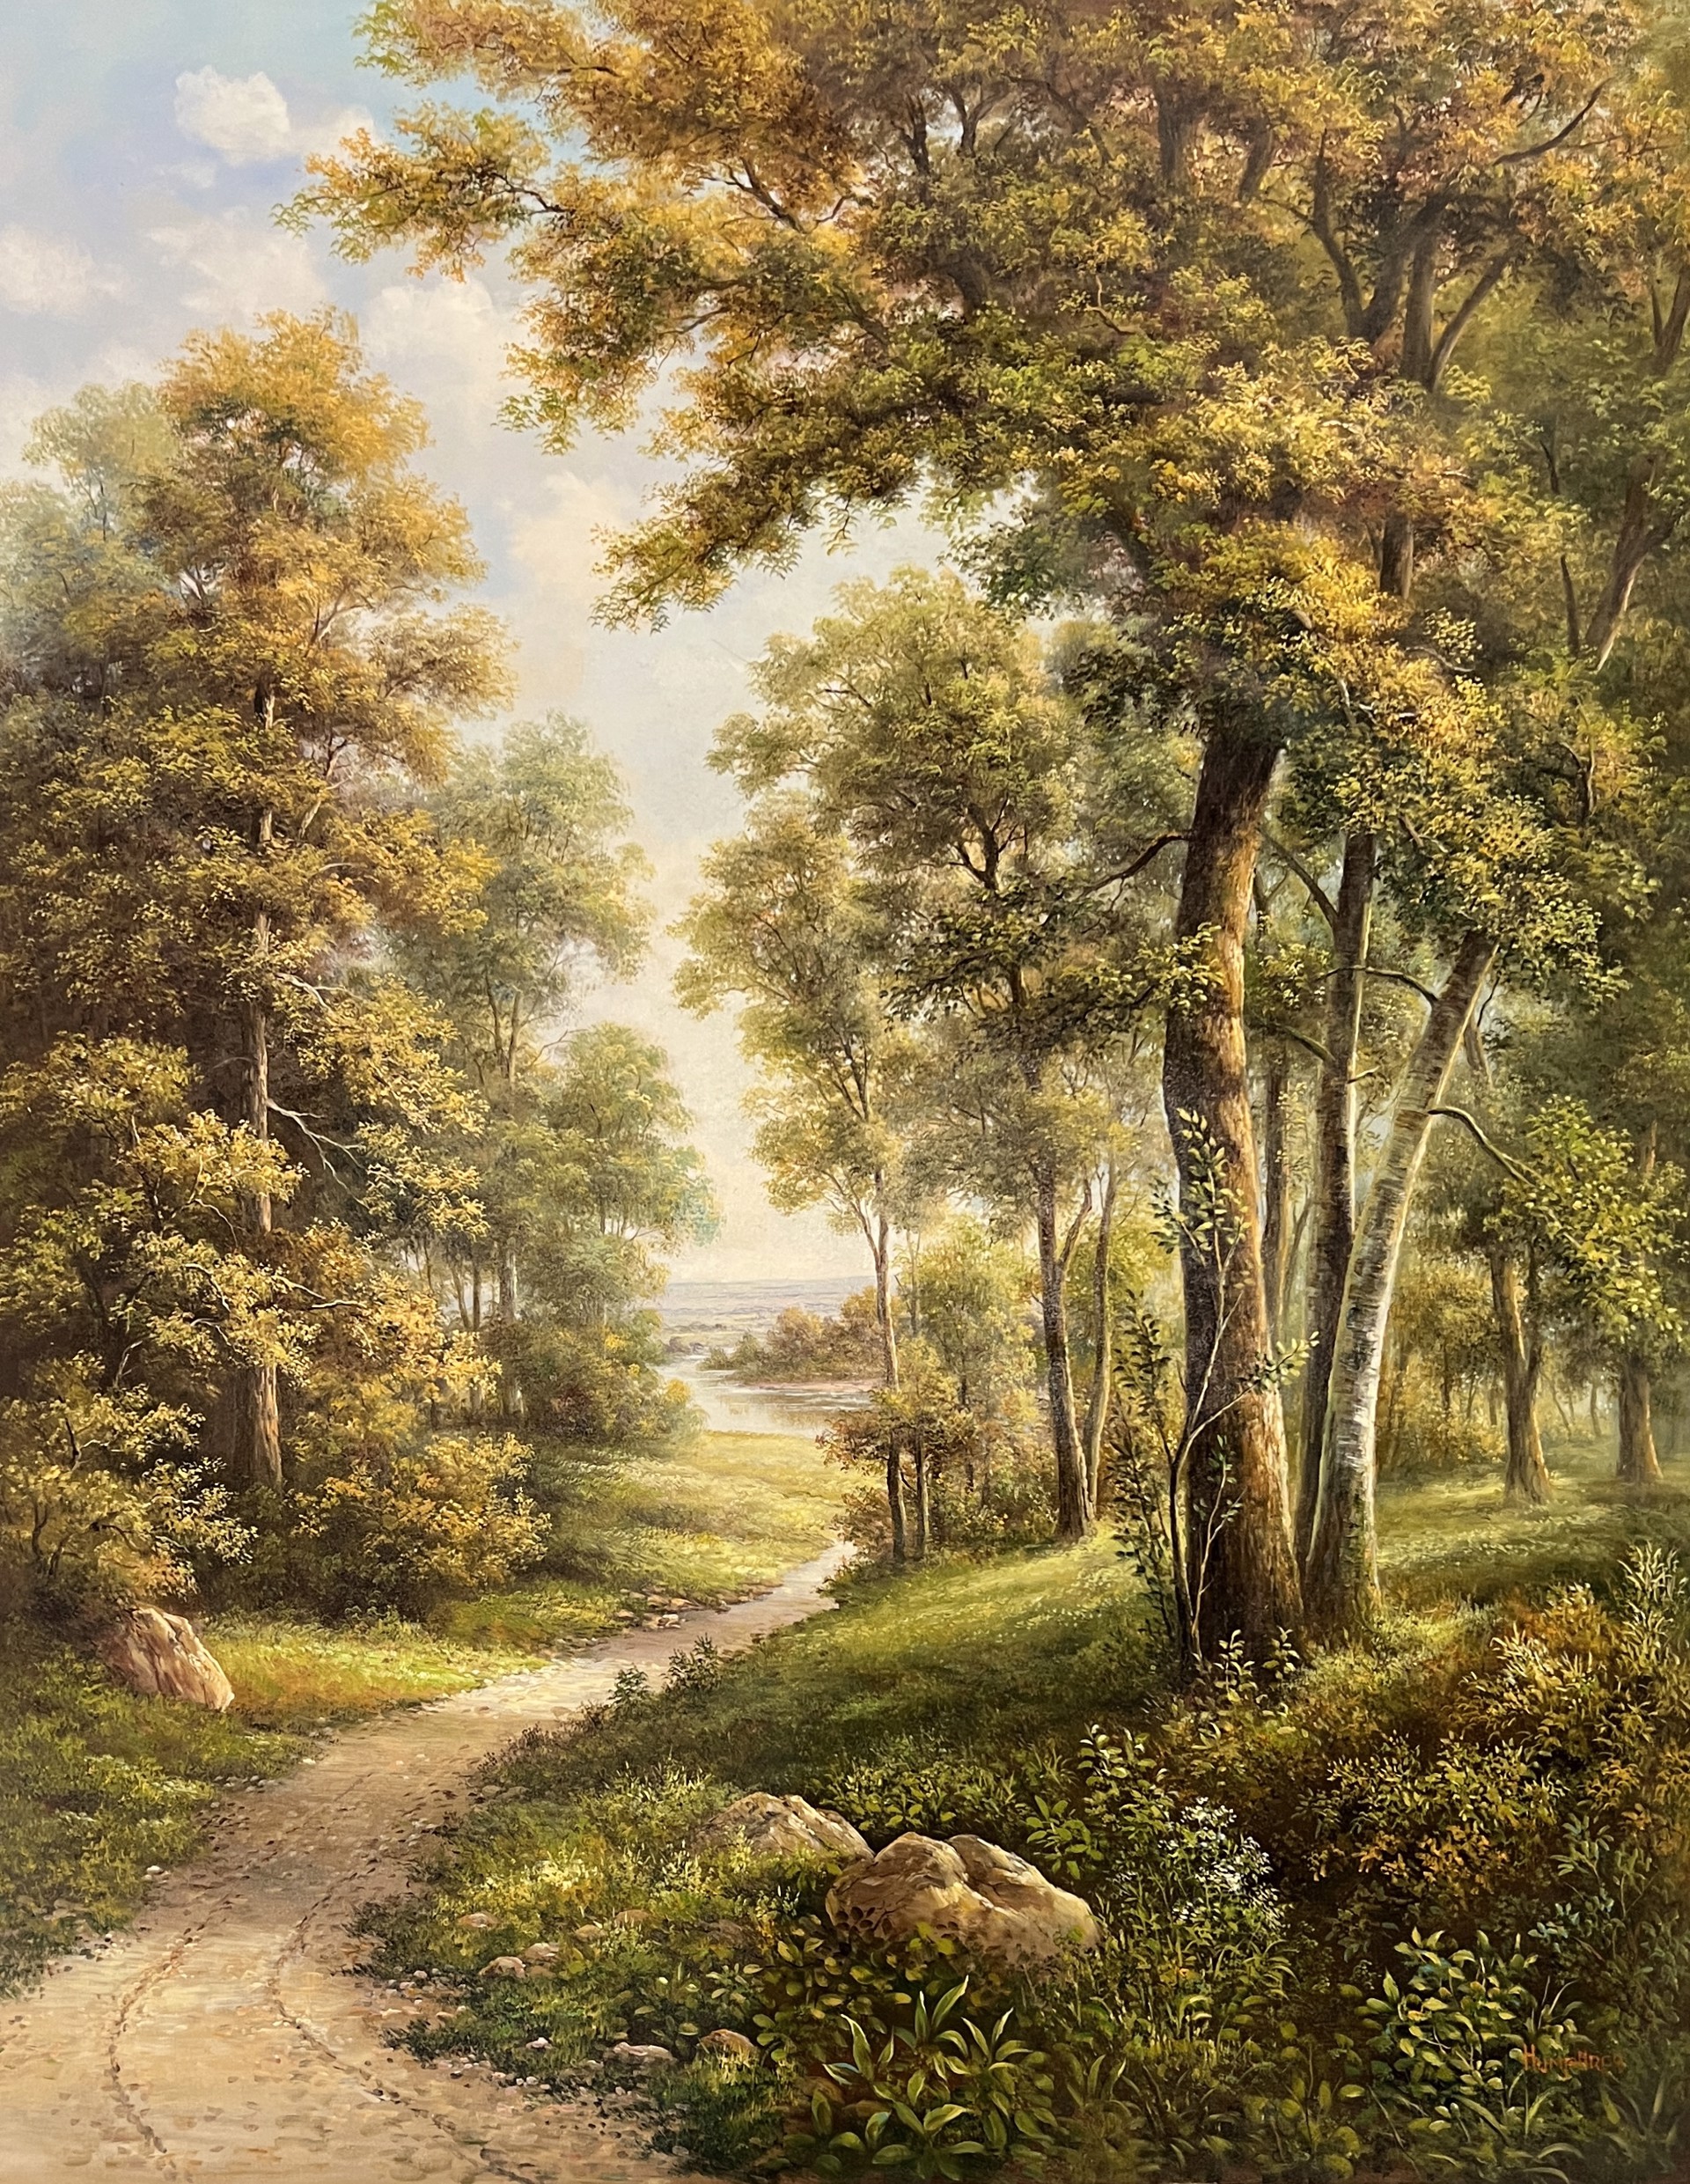 CART PATH TO THE RIVER by HUMPHREY